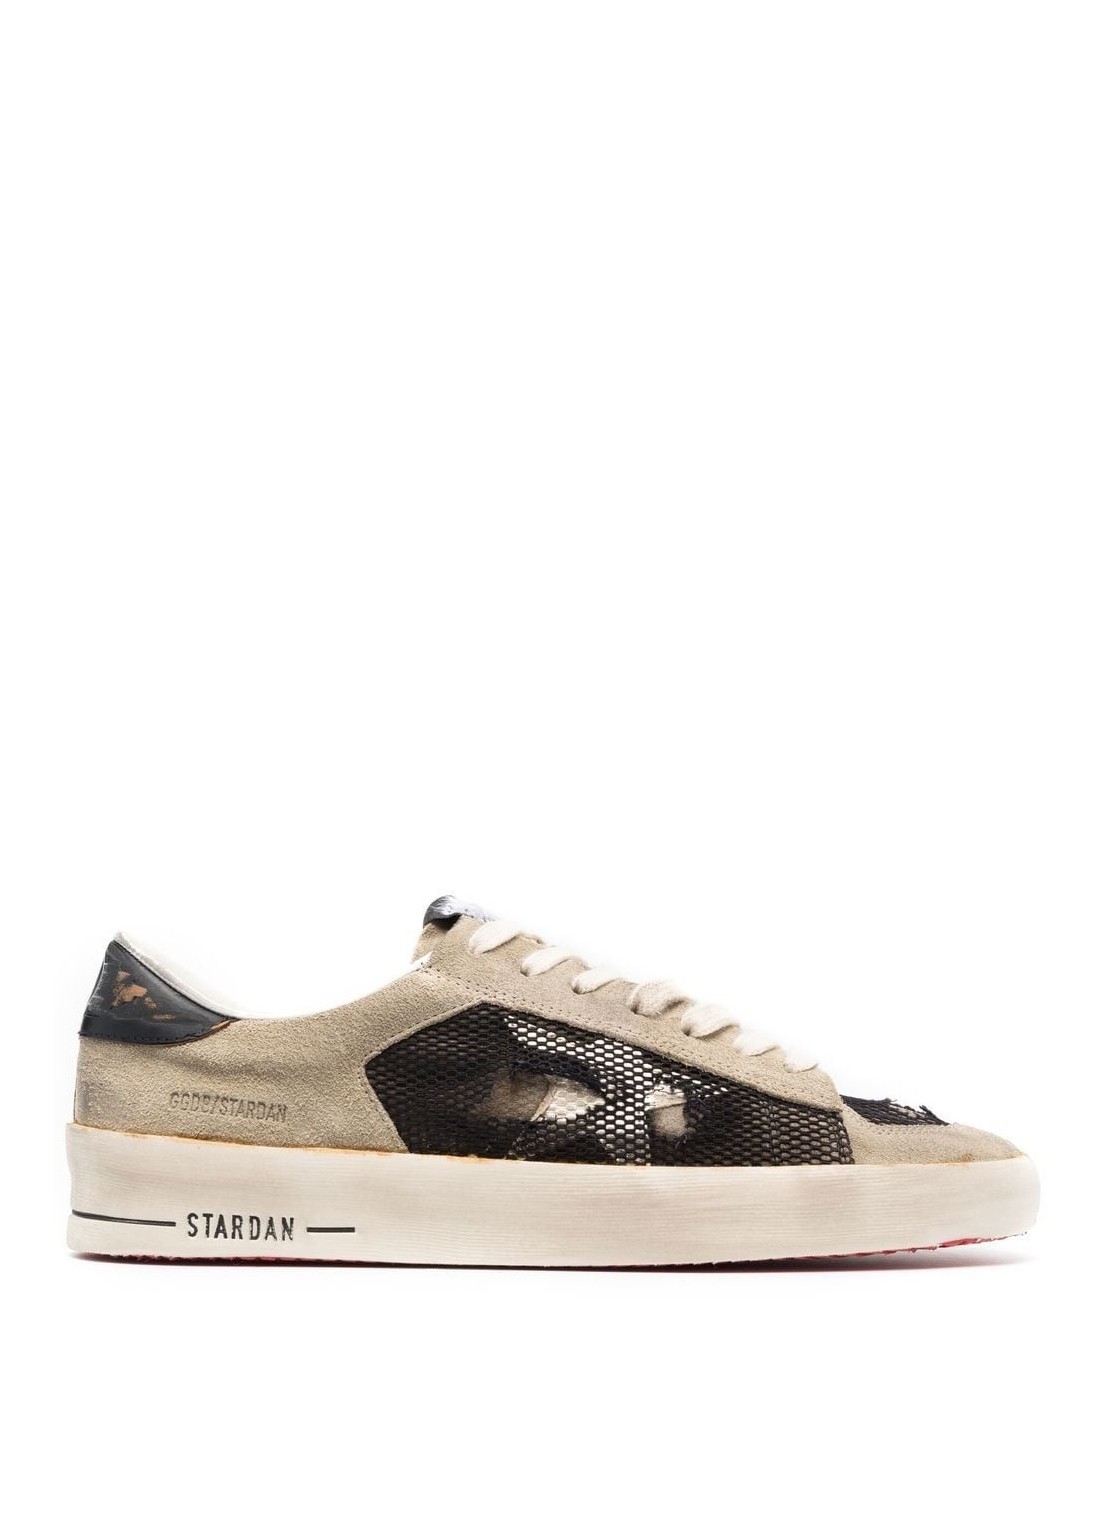 golden goose stardan suede upper with net laminated star shiny leather ...